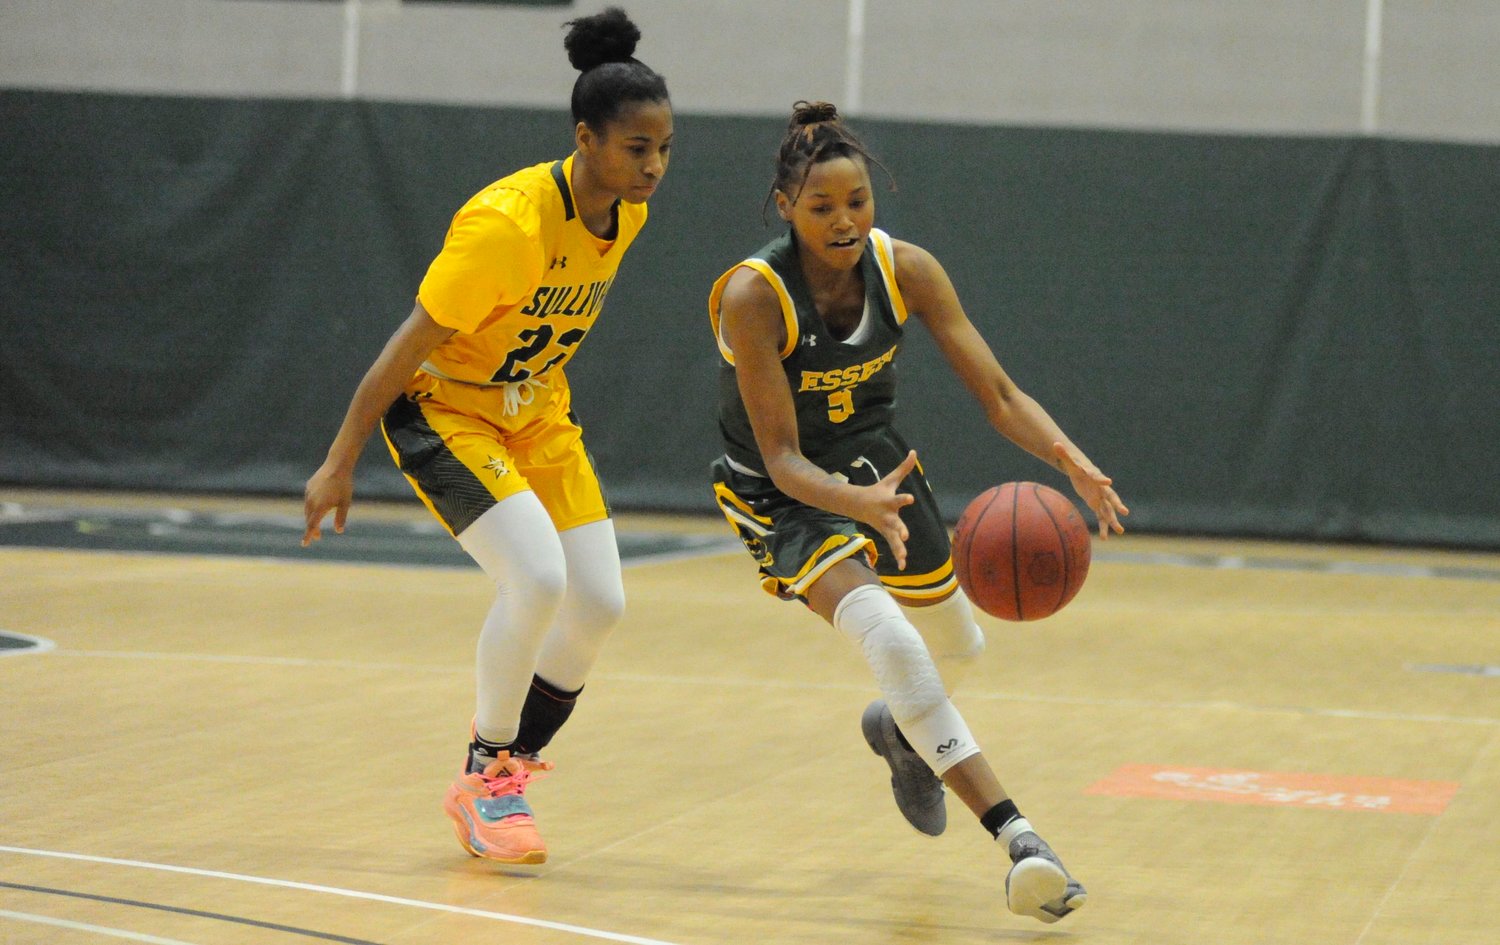 Hot pursuit. SUNY Sullivan’s Anisa Perry closes in on Essex’s Jakira Coar, the game’s leading scorer with 23 points including 5 three-pointers.